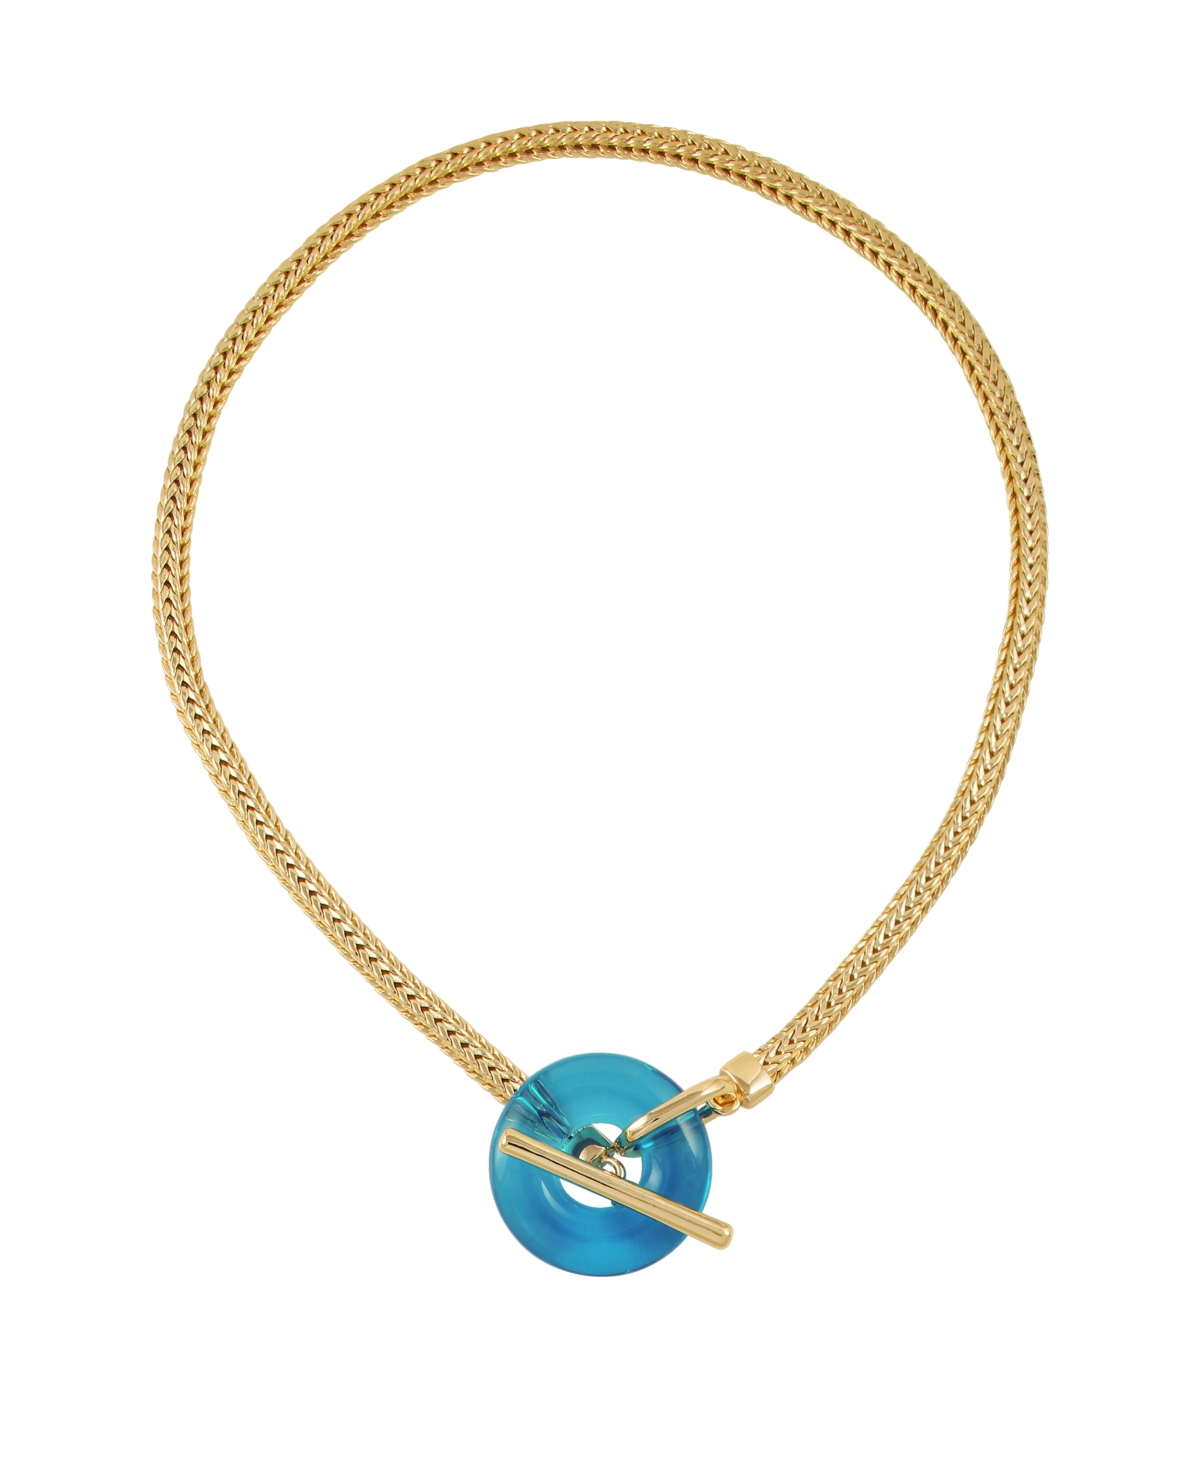 Snake Chain Necklace - Gold-Tone, Blue